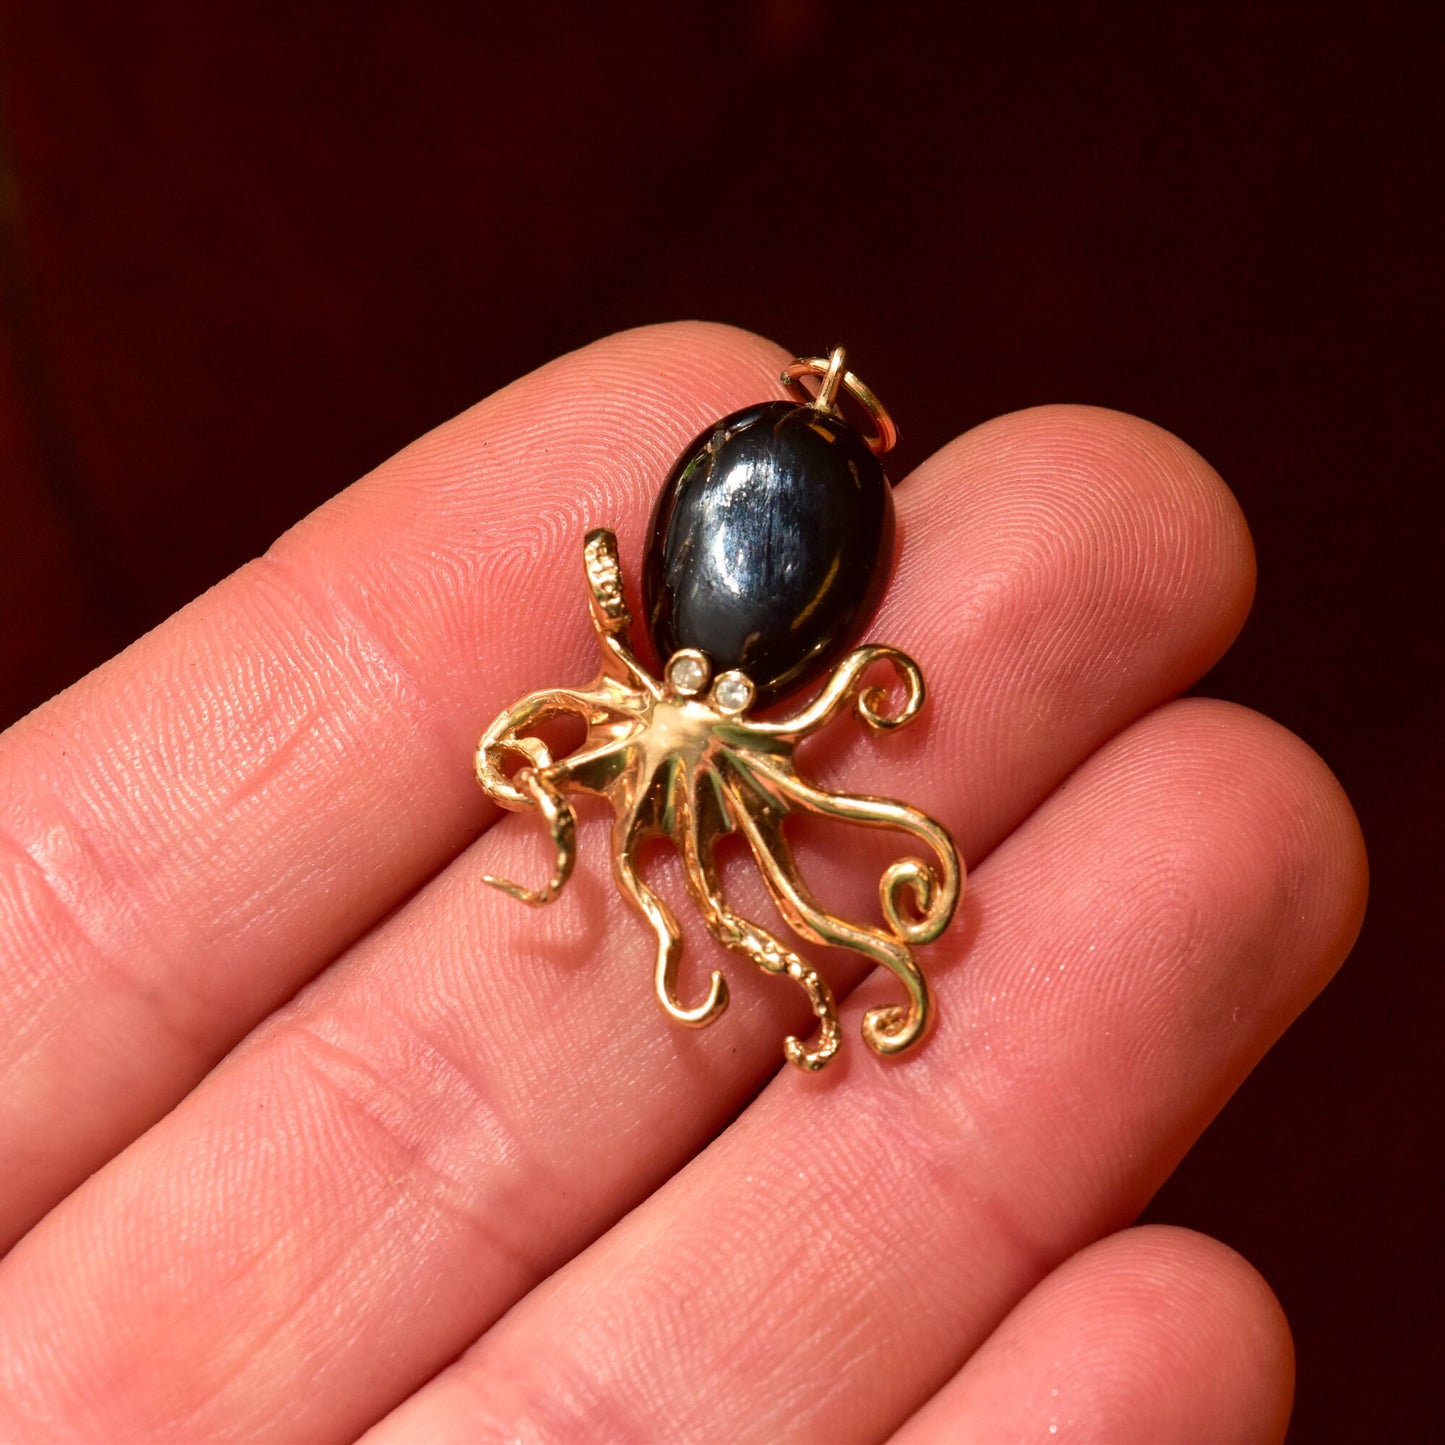 10K yellow gold 3D octopus pendant with black coral cabochon body and diamond eye, held in hand against dark red background, showing intricate tentacle details of the aquatic animal-inspired jewelry piece.